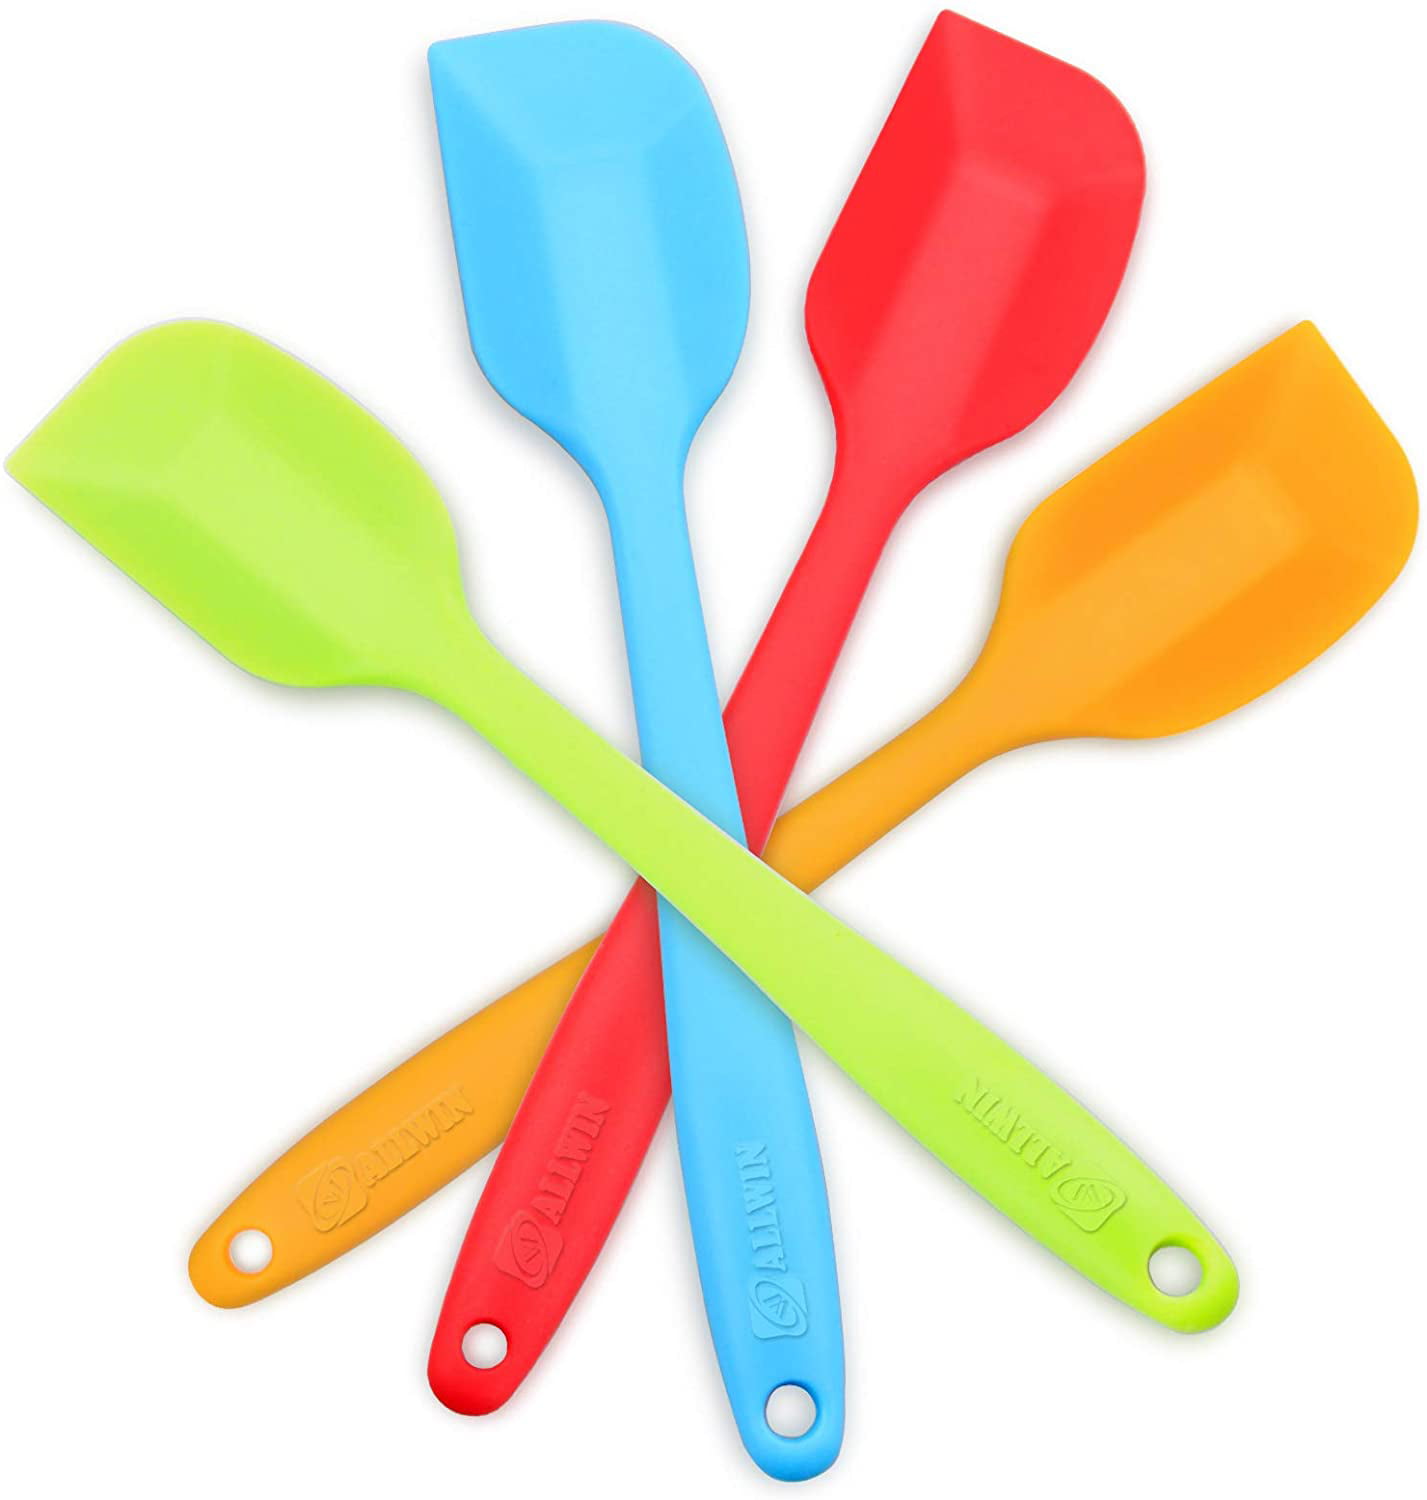 Light Blue Non-Stick Rubber Spatulas with Stainless Steel Core Silicone Spatula 4-Piece Set,Heat-Resistant Spatulas